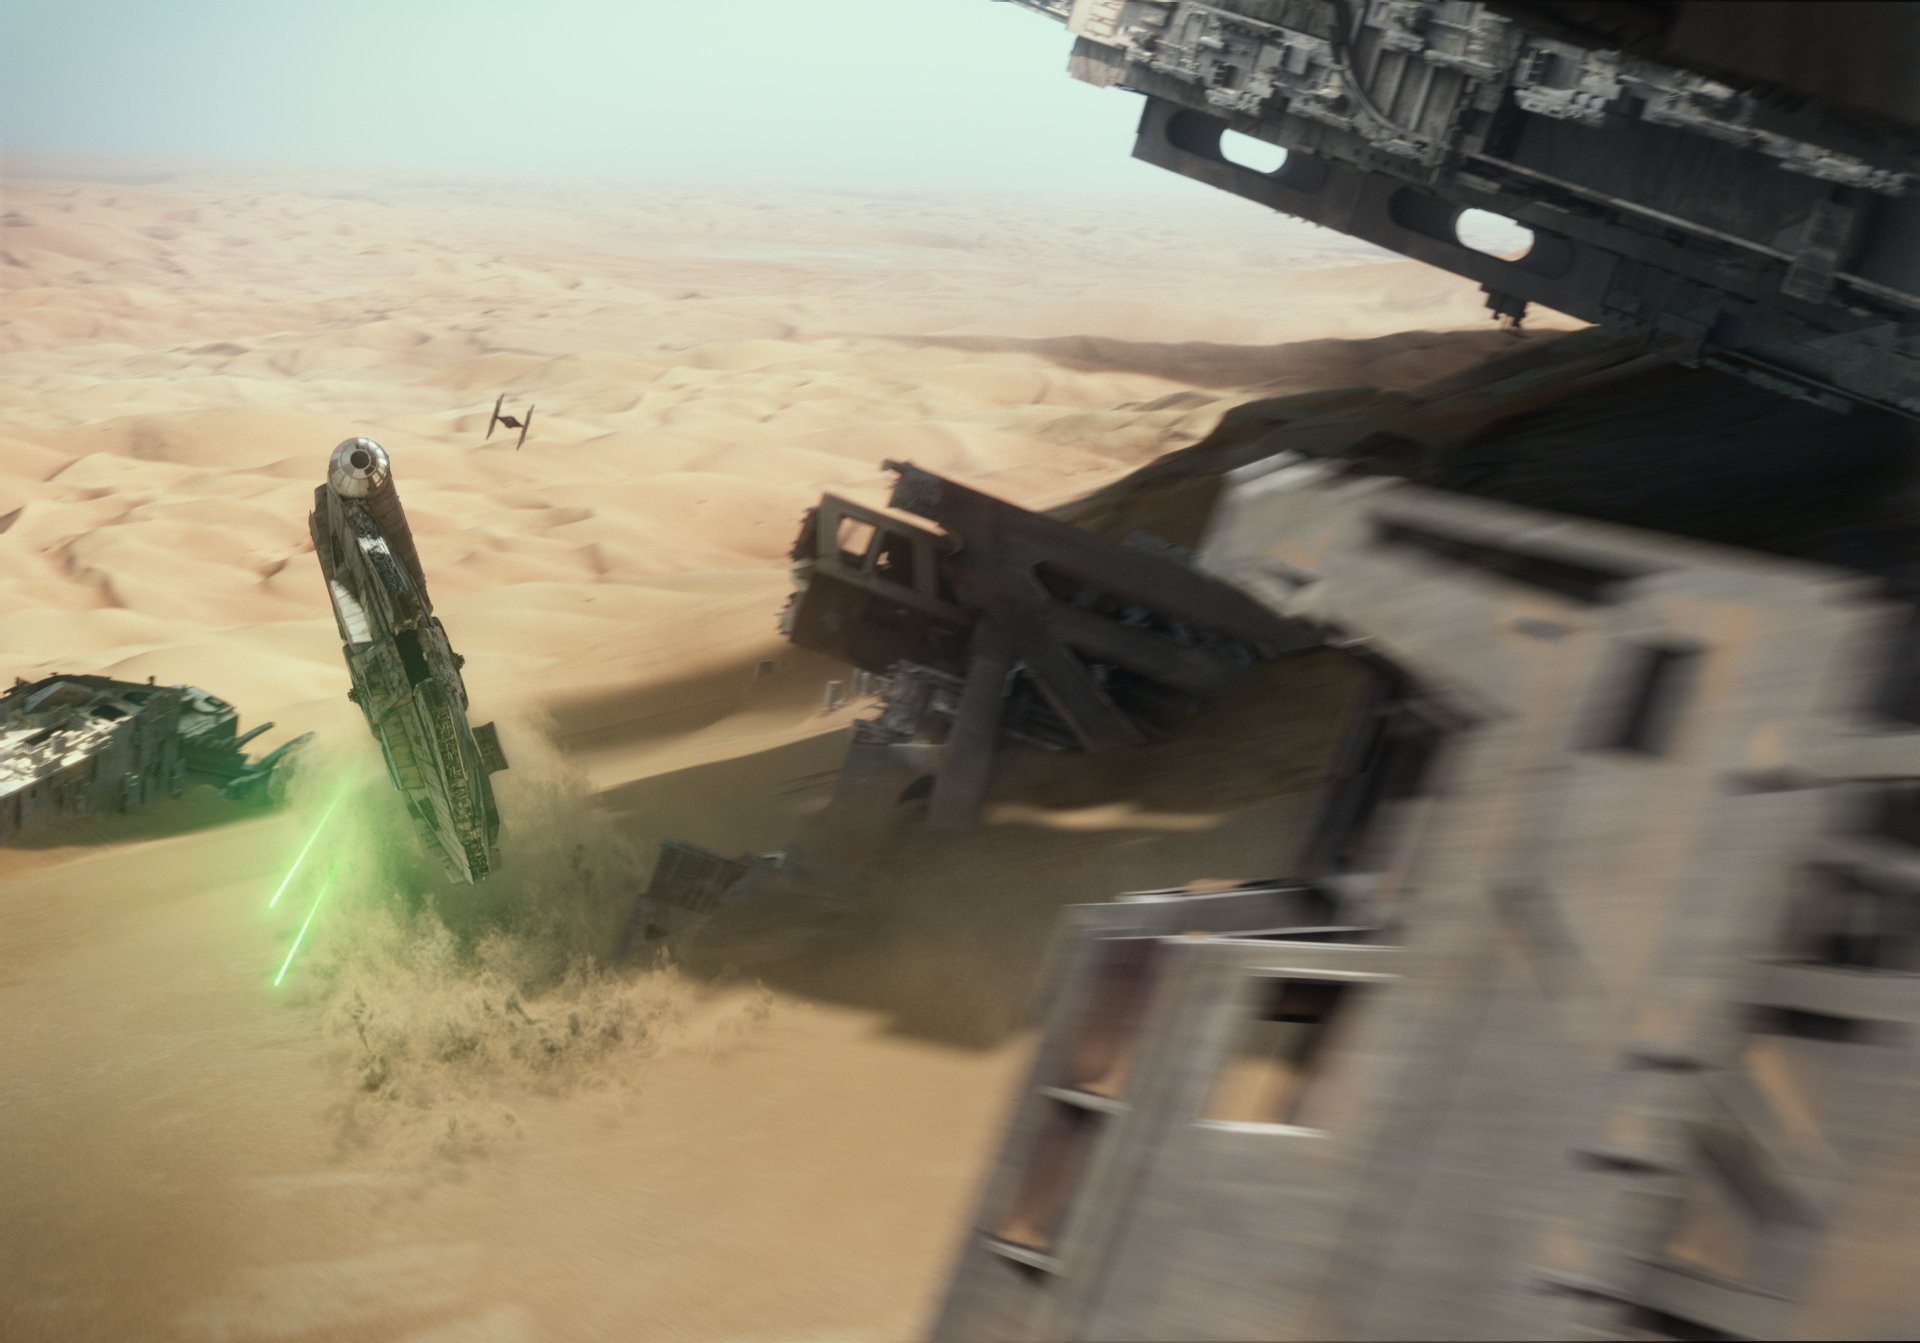 Star Wars Ep. VII: The Force Awakens instal the new